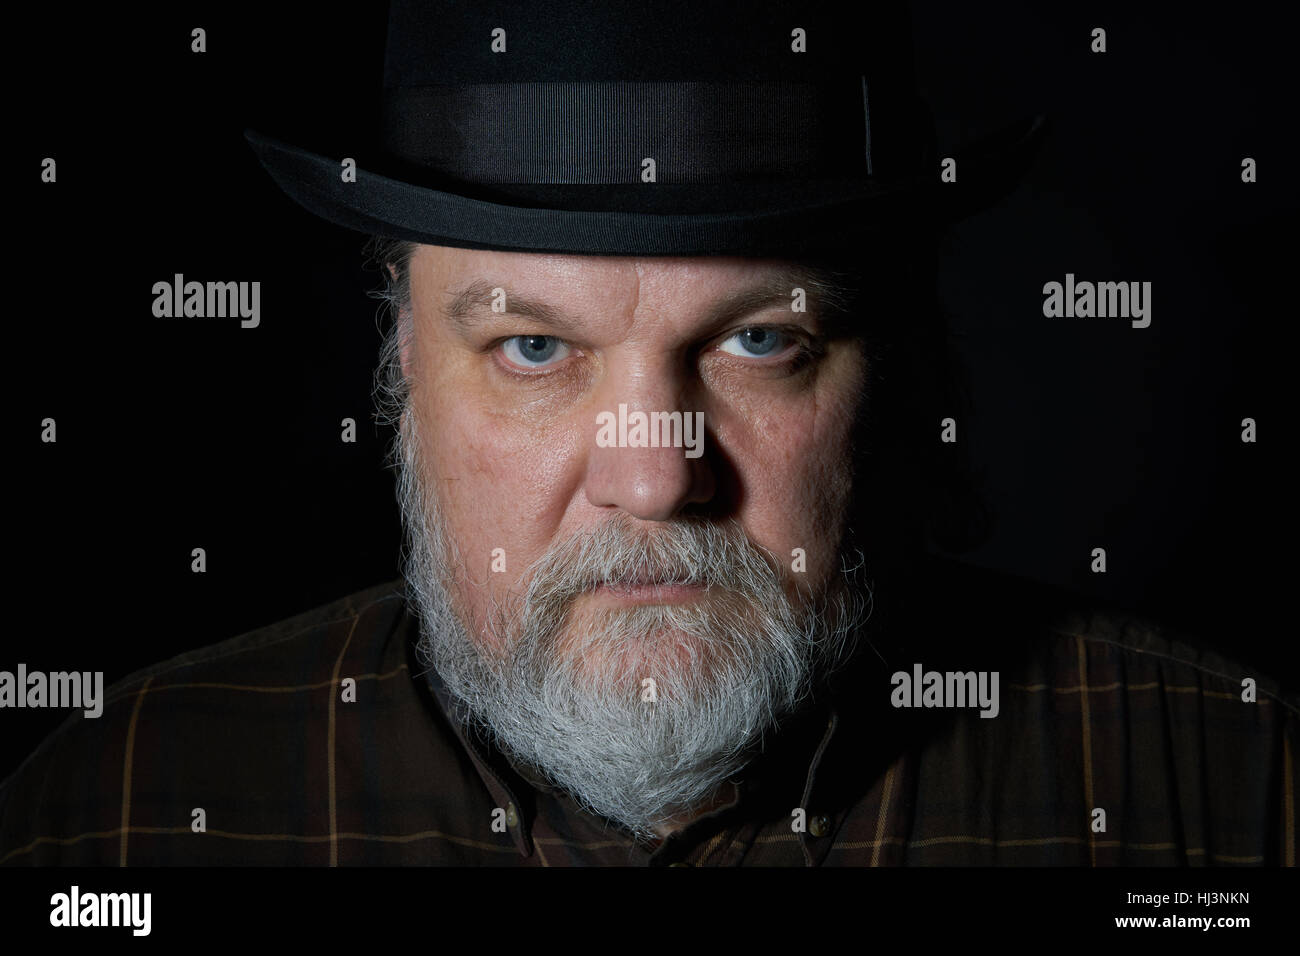 Portrait of the man with gray beard in black hat on the black background Stock Photo